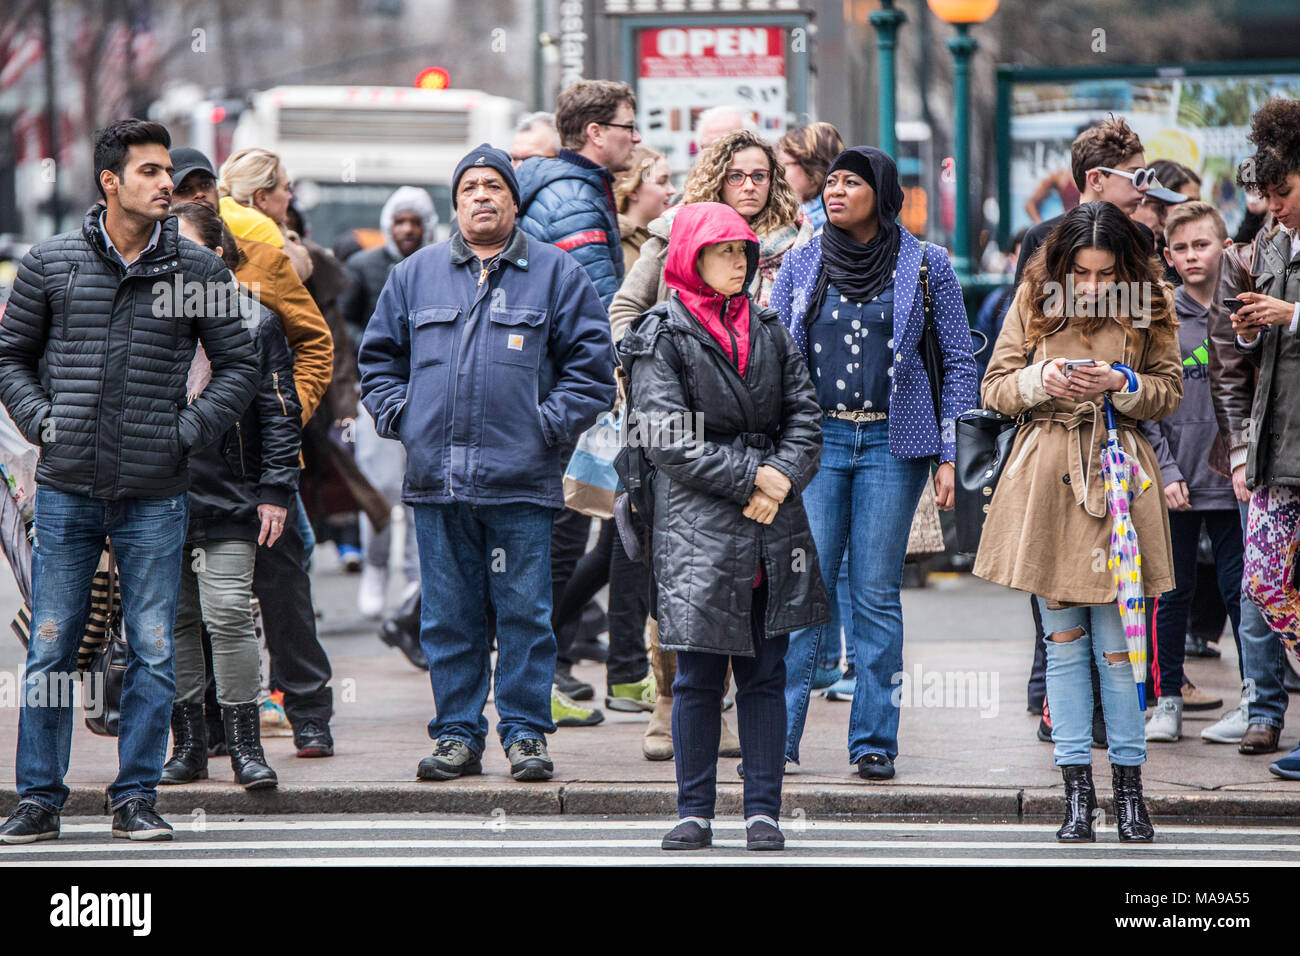 NEW YORK CITY - MARCH 29, 2018: Busy New York City street scene of diversity of pedestrian people crossing the street in Midtown Manhattan on 34th Str Stock Photo